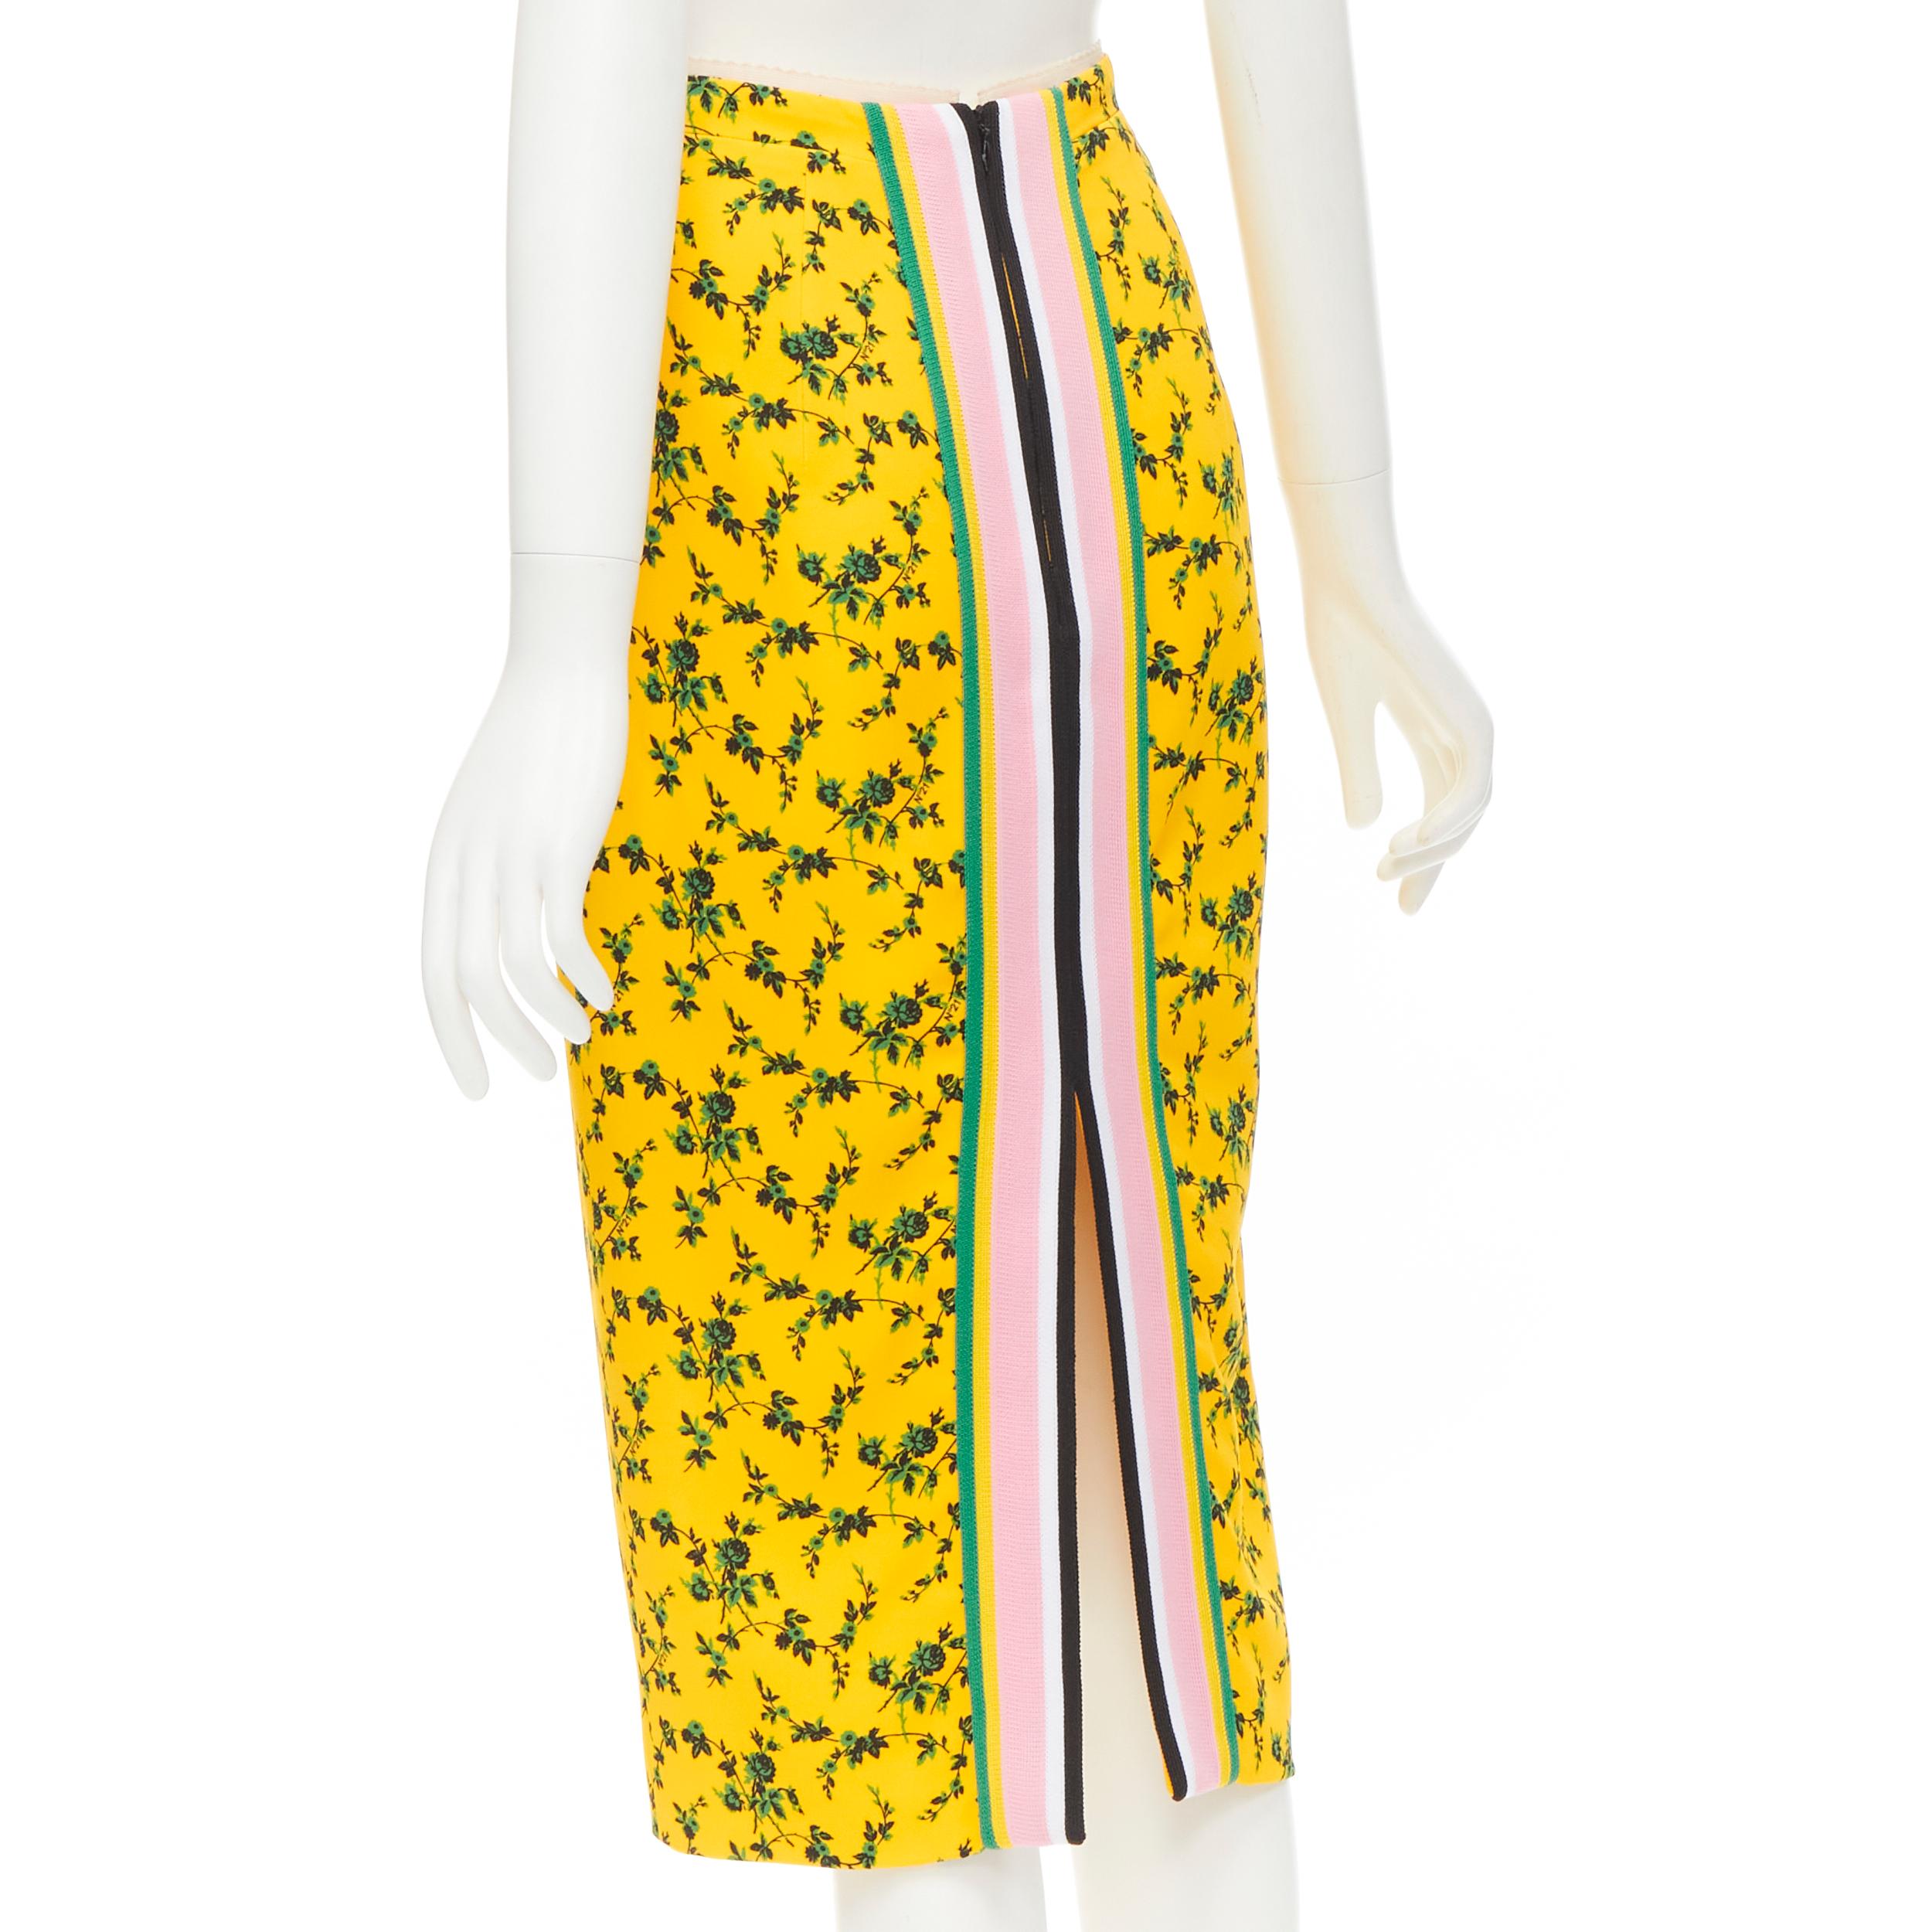 NO 21 yellow green leaf print contrast pink band pencil skirt IT38 XS 
Reference: LNKO/A01967 
Brand: No. 21 
Material: Viscose 
Color: Yellow 
Pattern: Floral 
Closure: Zip 
Extra Detail: Custom floral print for No 21 with logo printed on it. 
Made